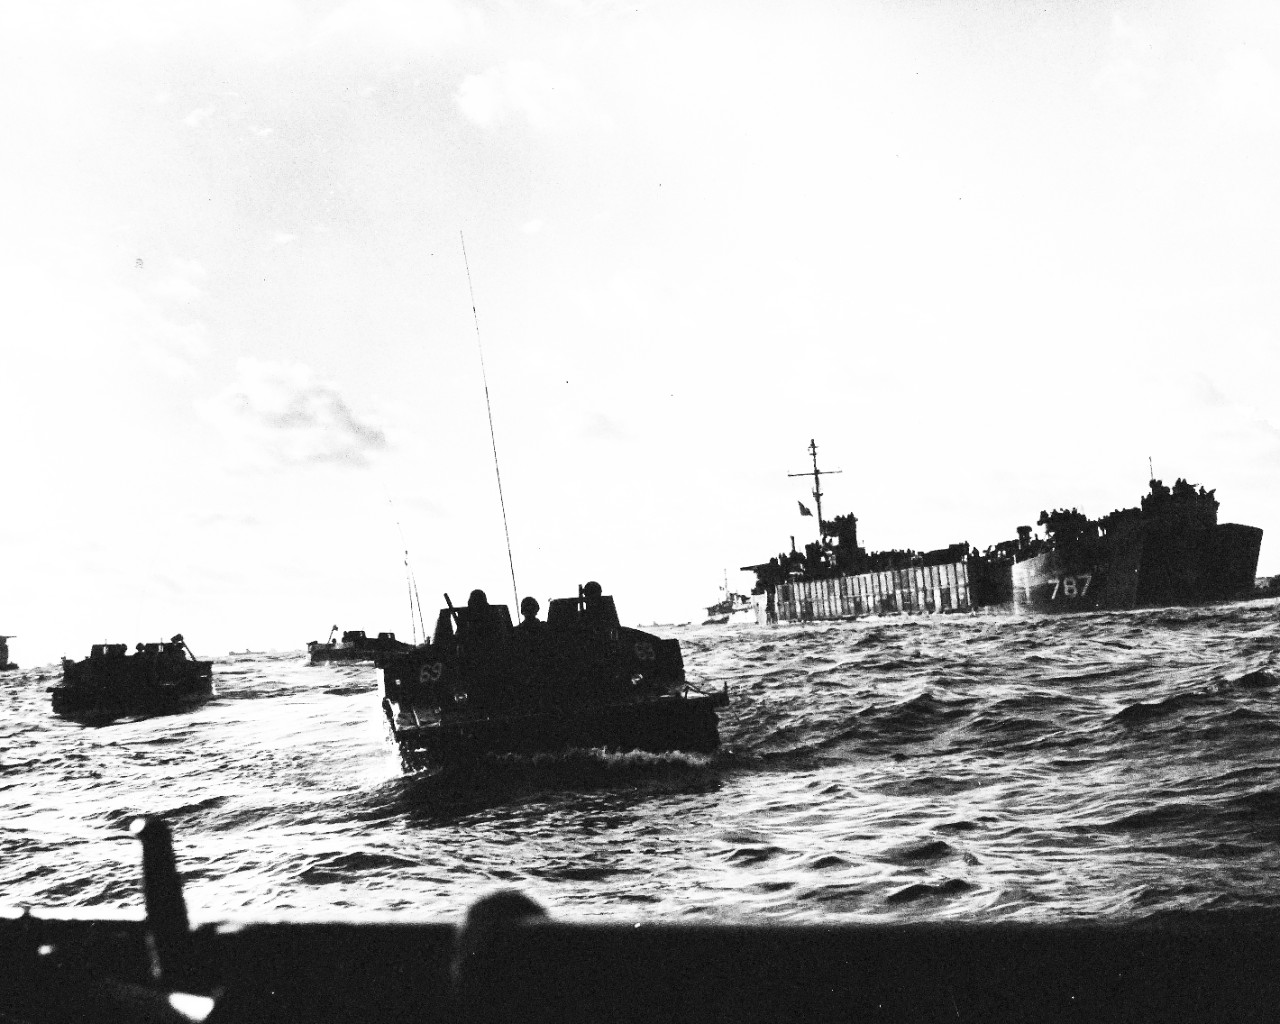 80-G-304871:  Battle for Iwo Jima, February 19, 1945.   Off the fire-swept beaches of Iwo Jima, Amtracks loaded with Marines emerge from the depths of a Coast-Guard manned LST-787 at the right and surge toward shore on D-Day.  Official U.S. Navy Photograph now in the collections of the National Archives.  (2016/01/19).